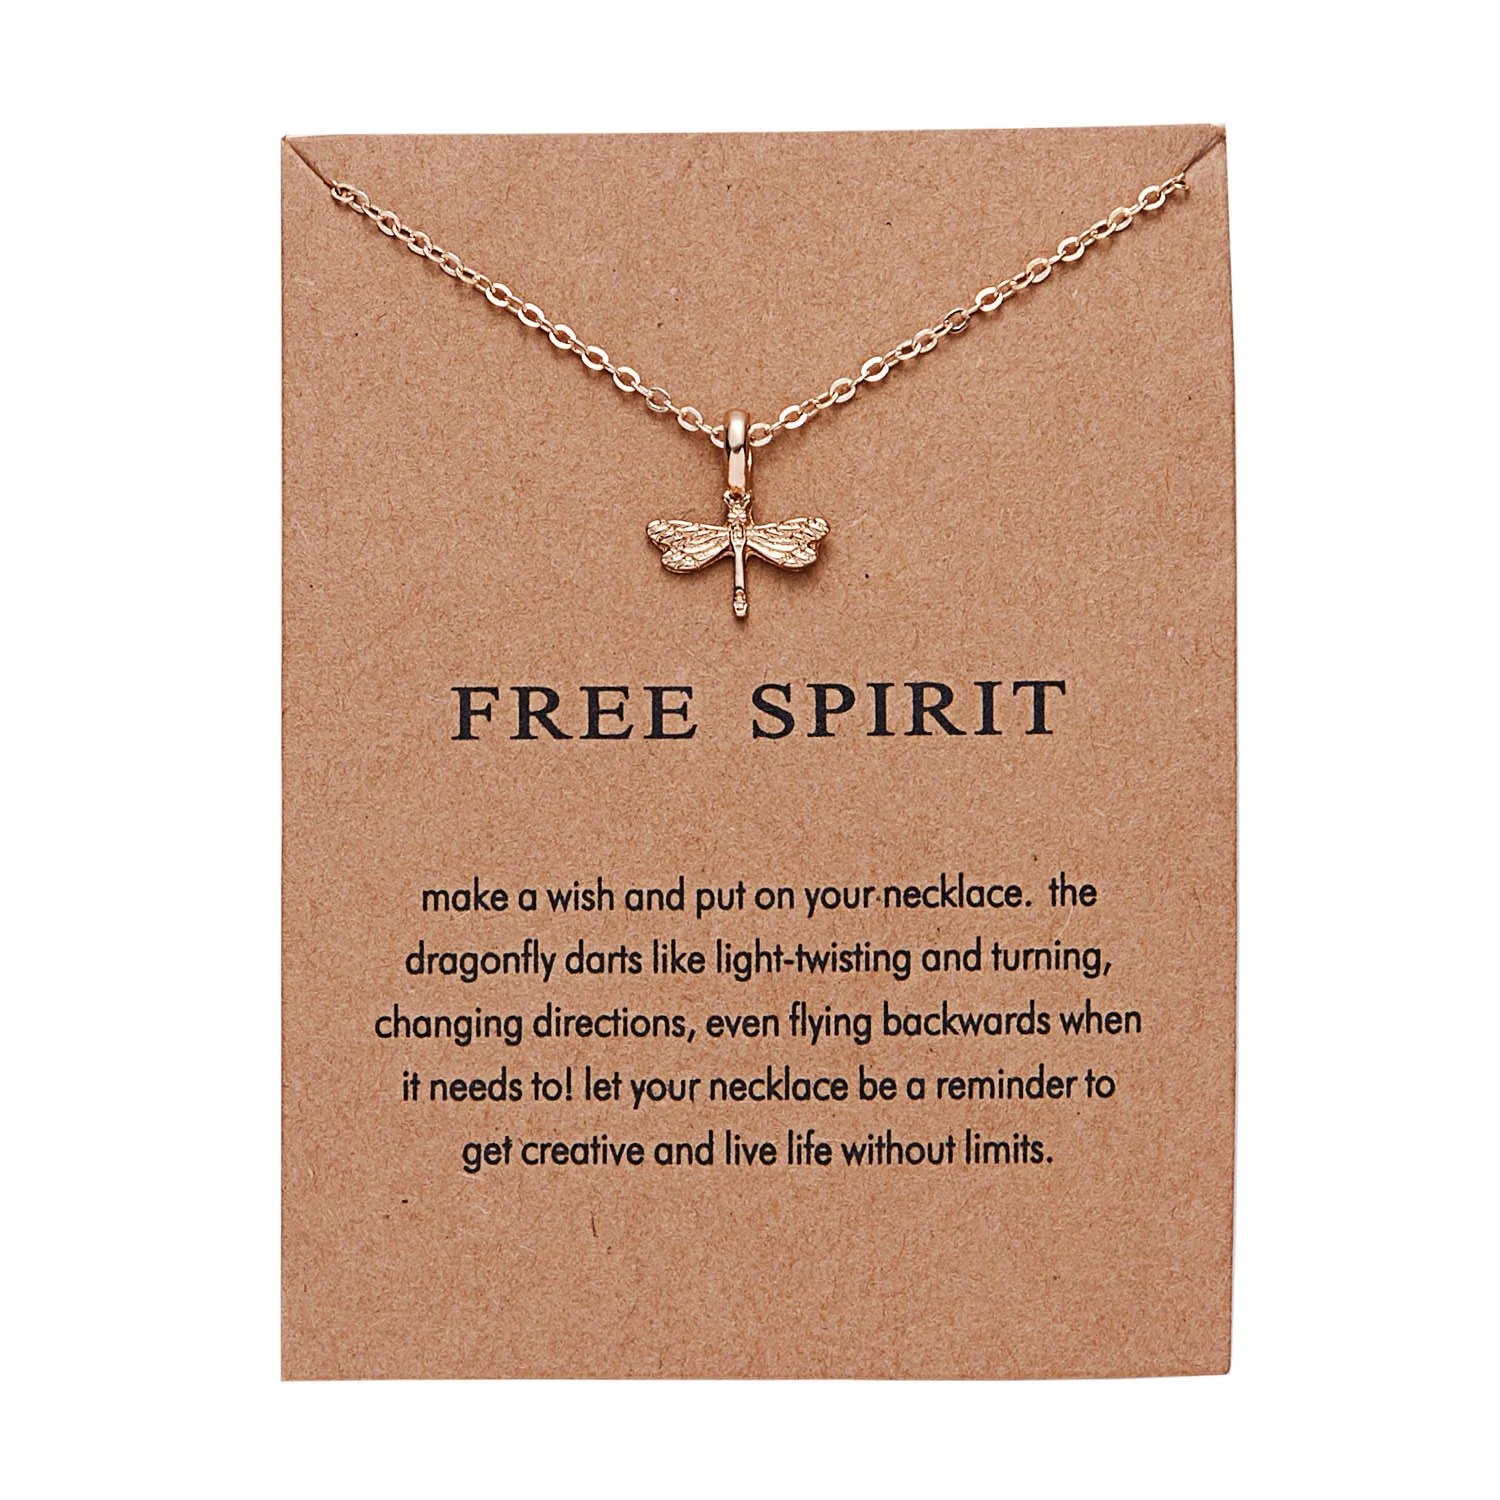 Fashion Little Cat Bird Gold Plated Cute Young Leafs Sun Pendant Girls Wish  Card Necklace Jewelry - Buy Gold Pendant Necklace,Wish Card